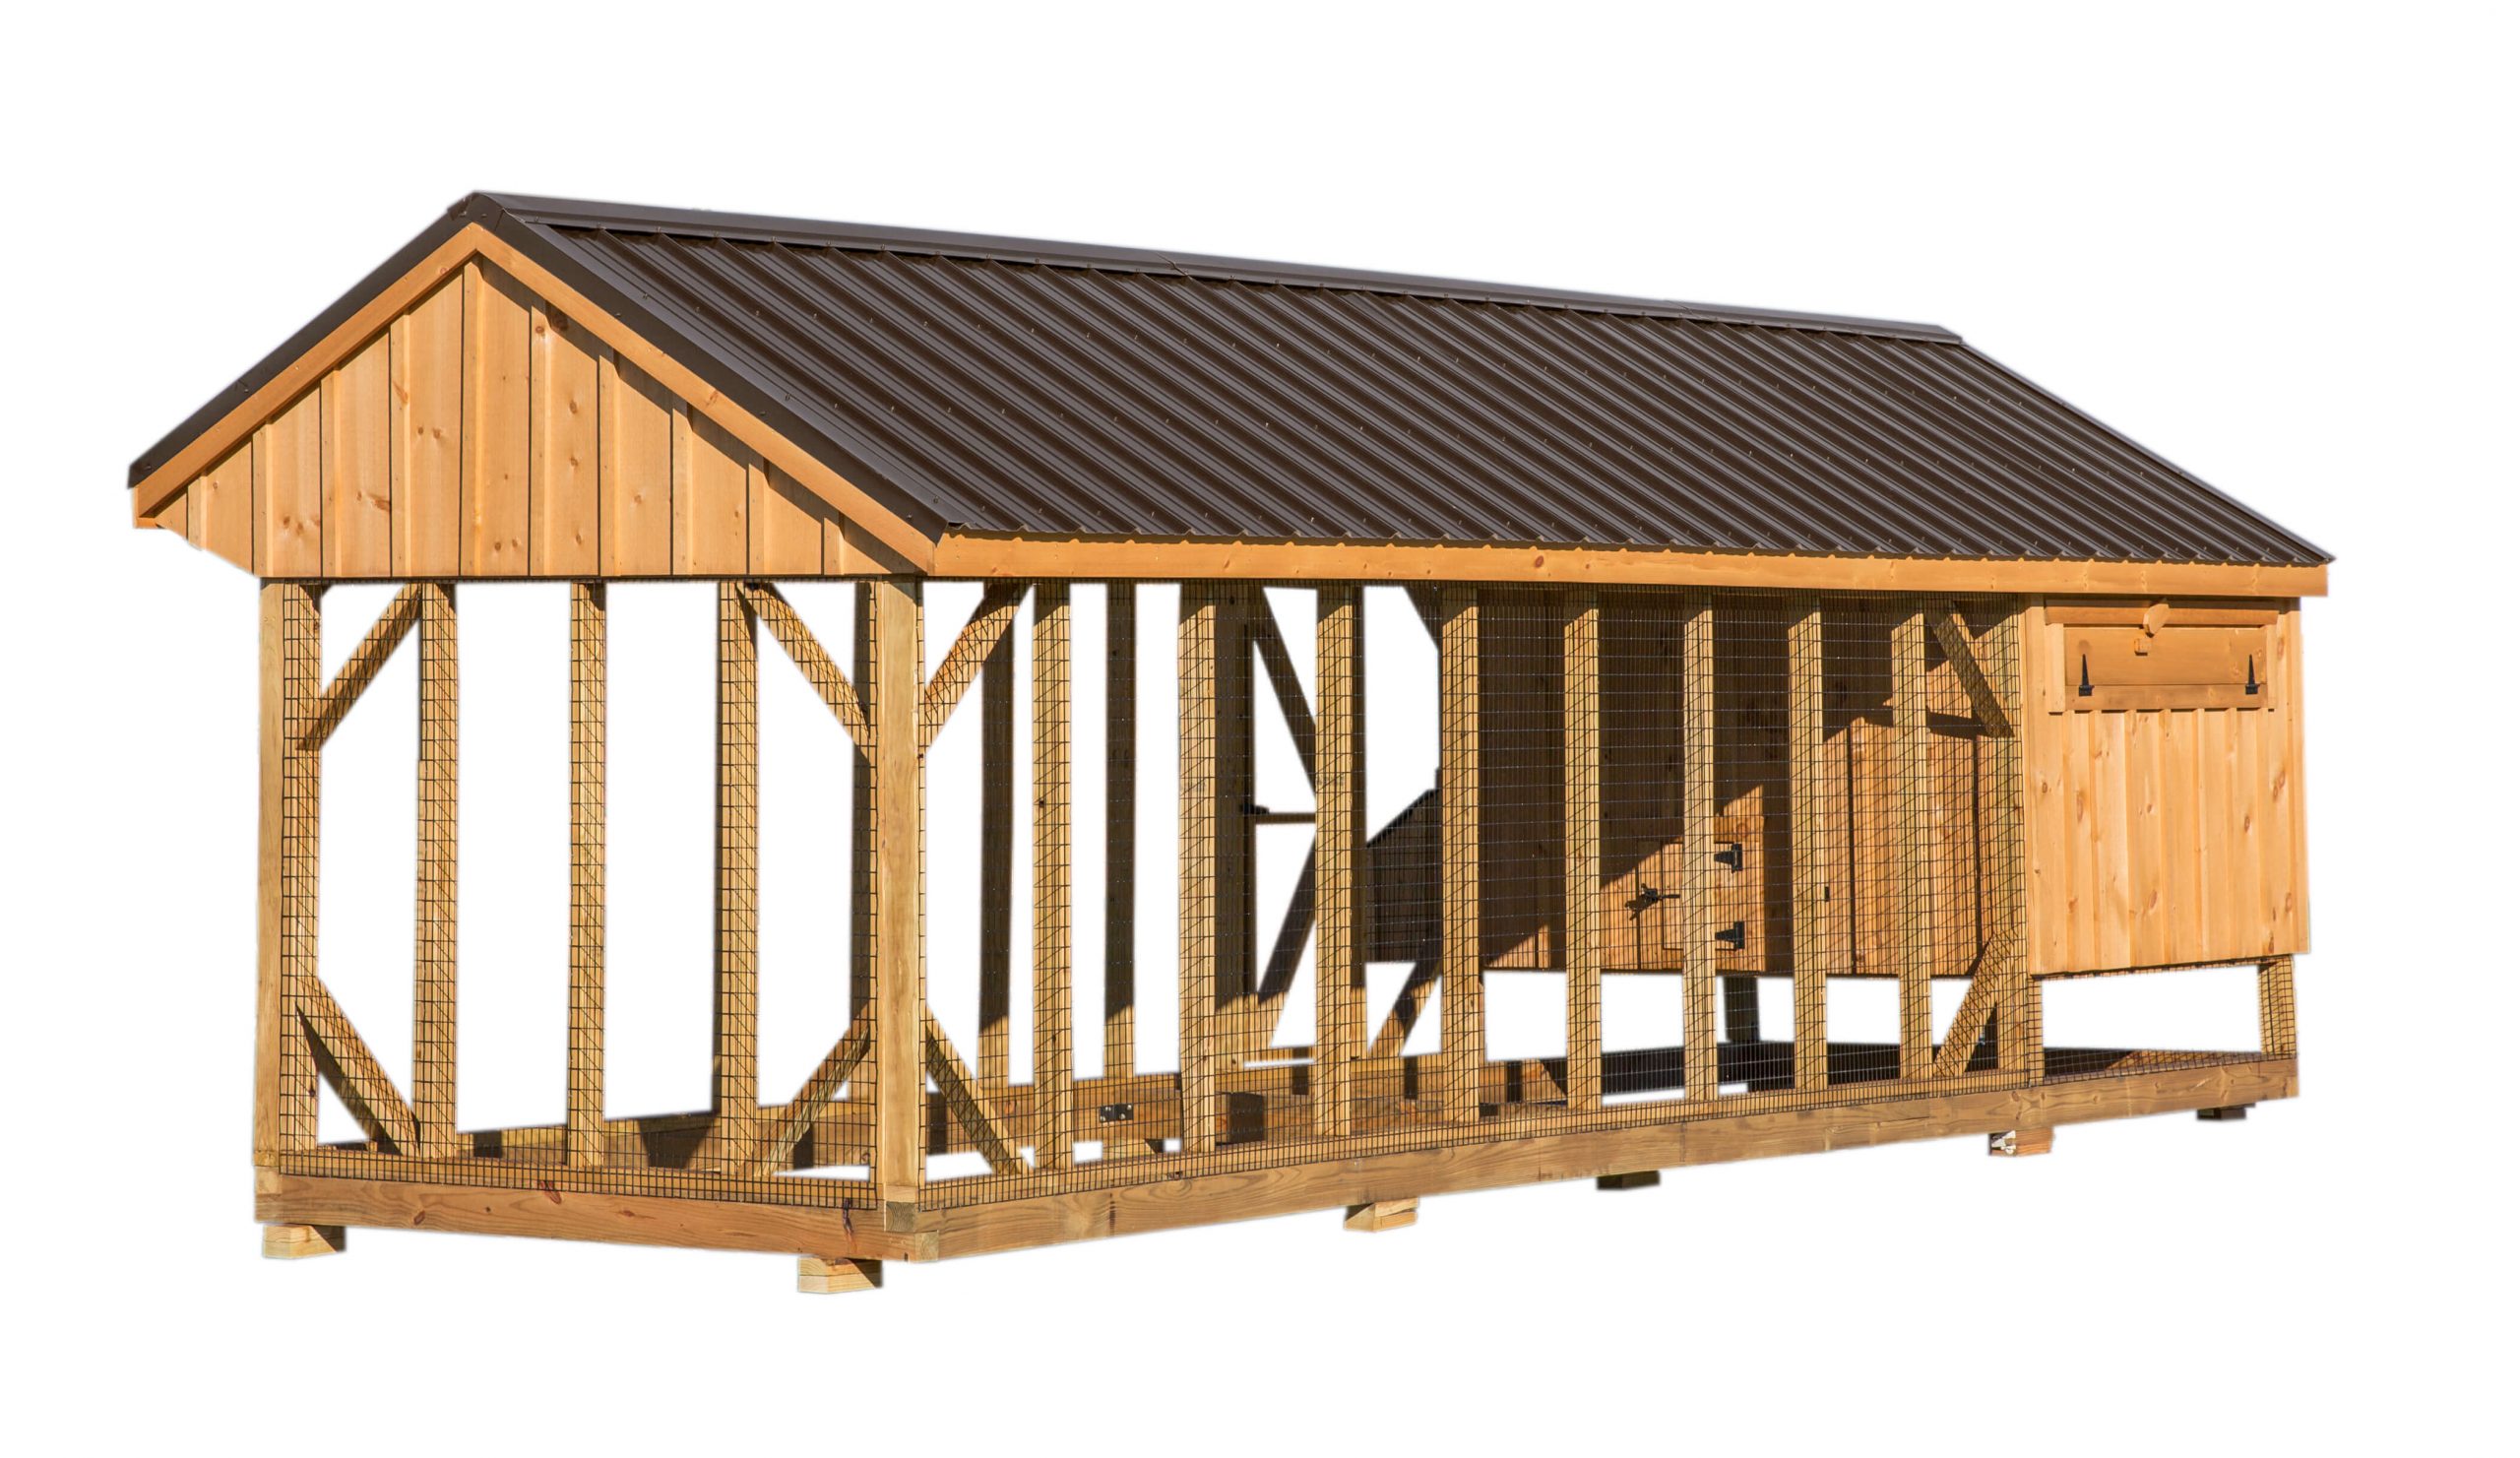 Exterior back view of a 7x24 Quaker Combination chicken coop with cupola